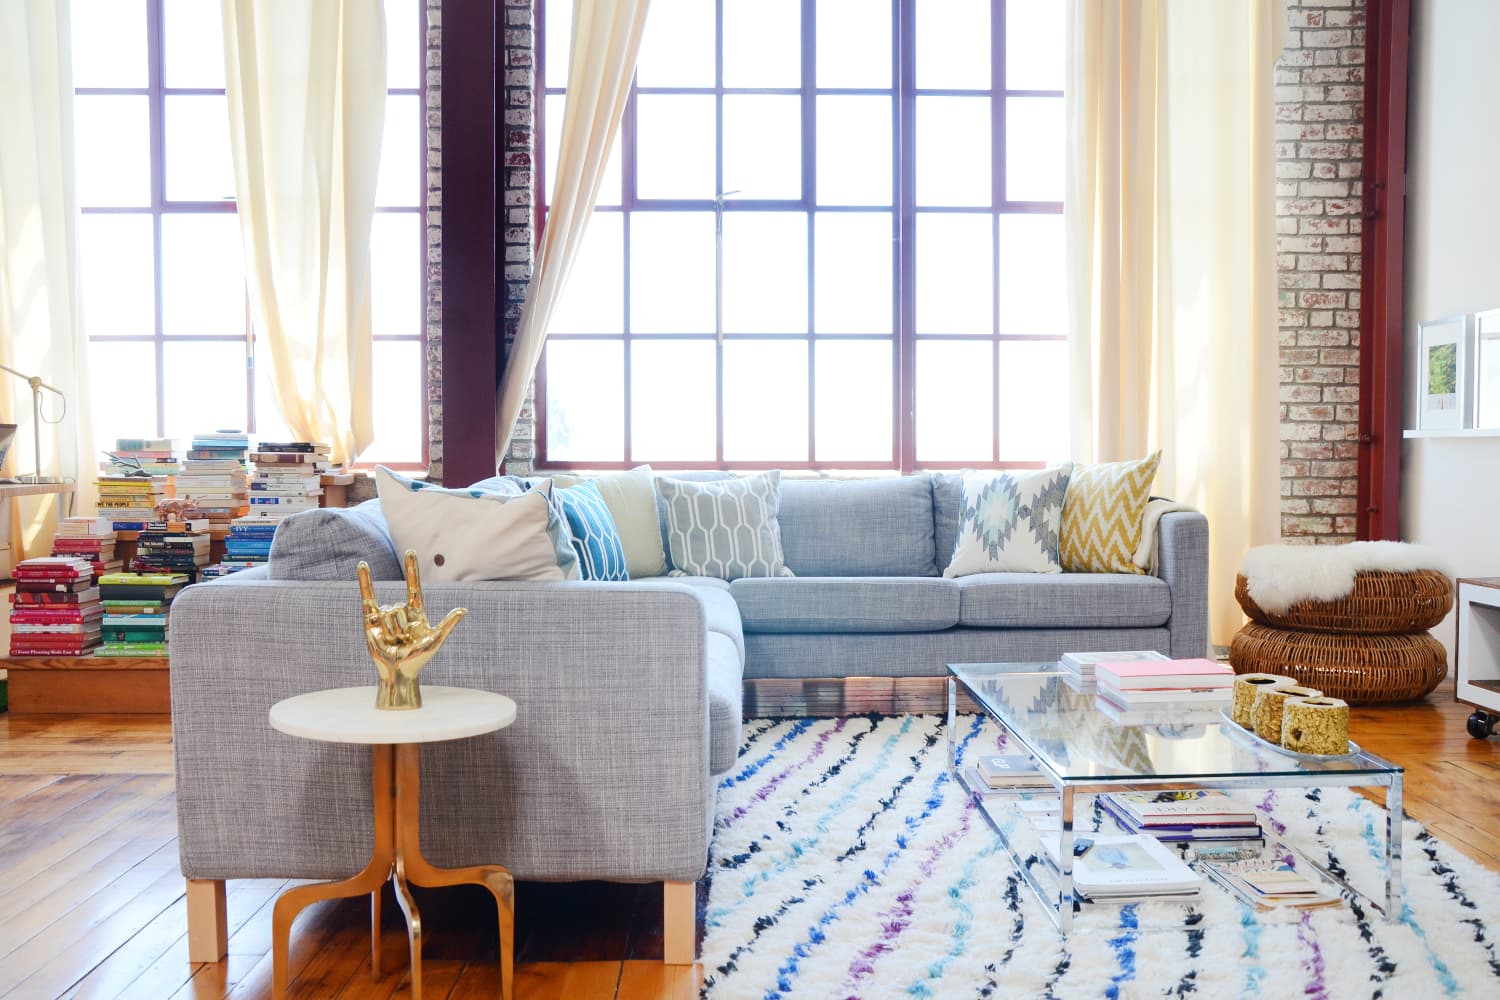 What to know about Oriental rugs to pin down the right price, Home/Garden